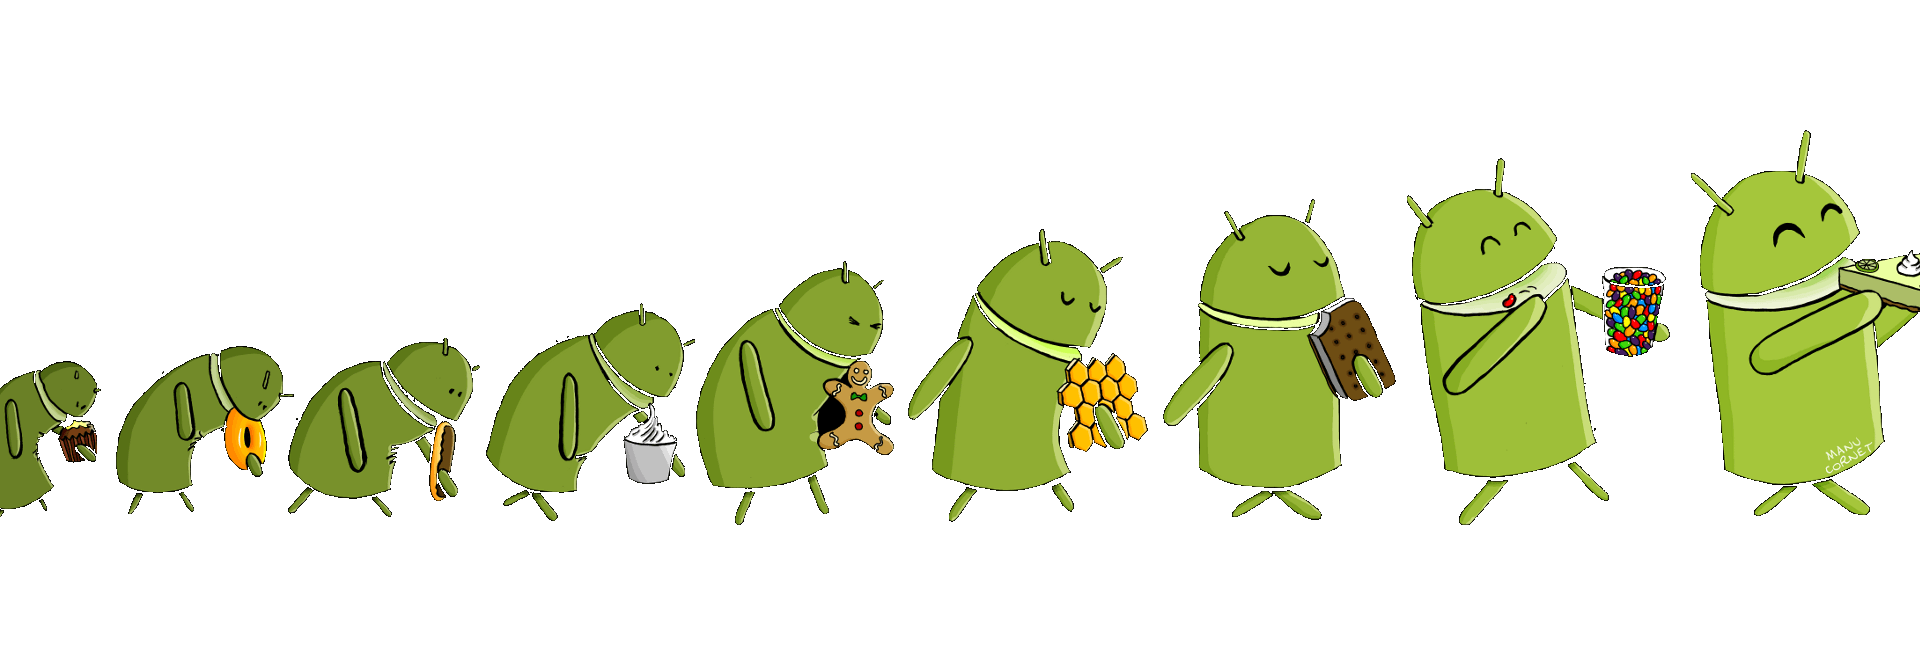 Android evolucao